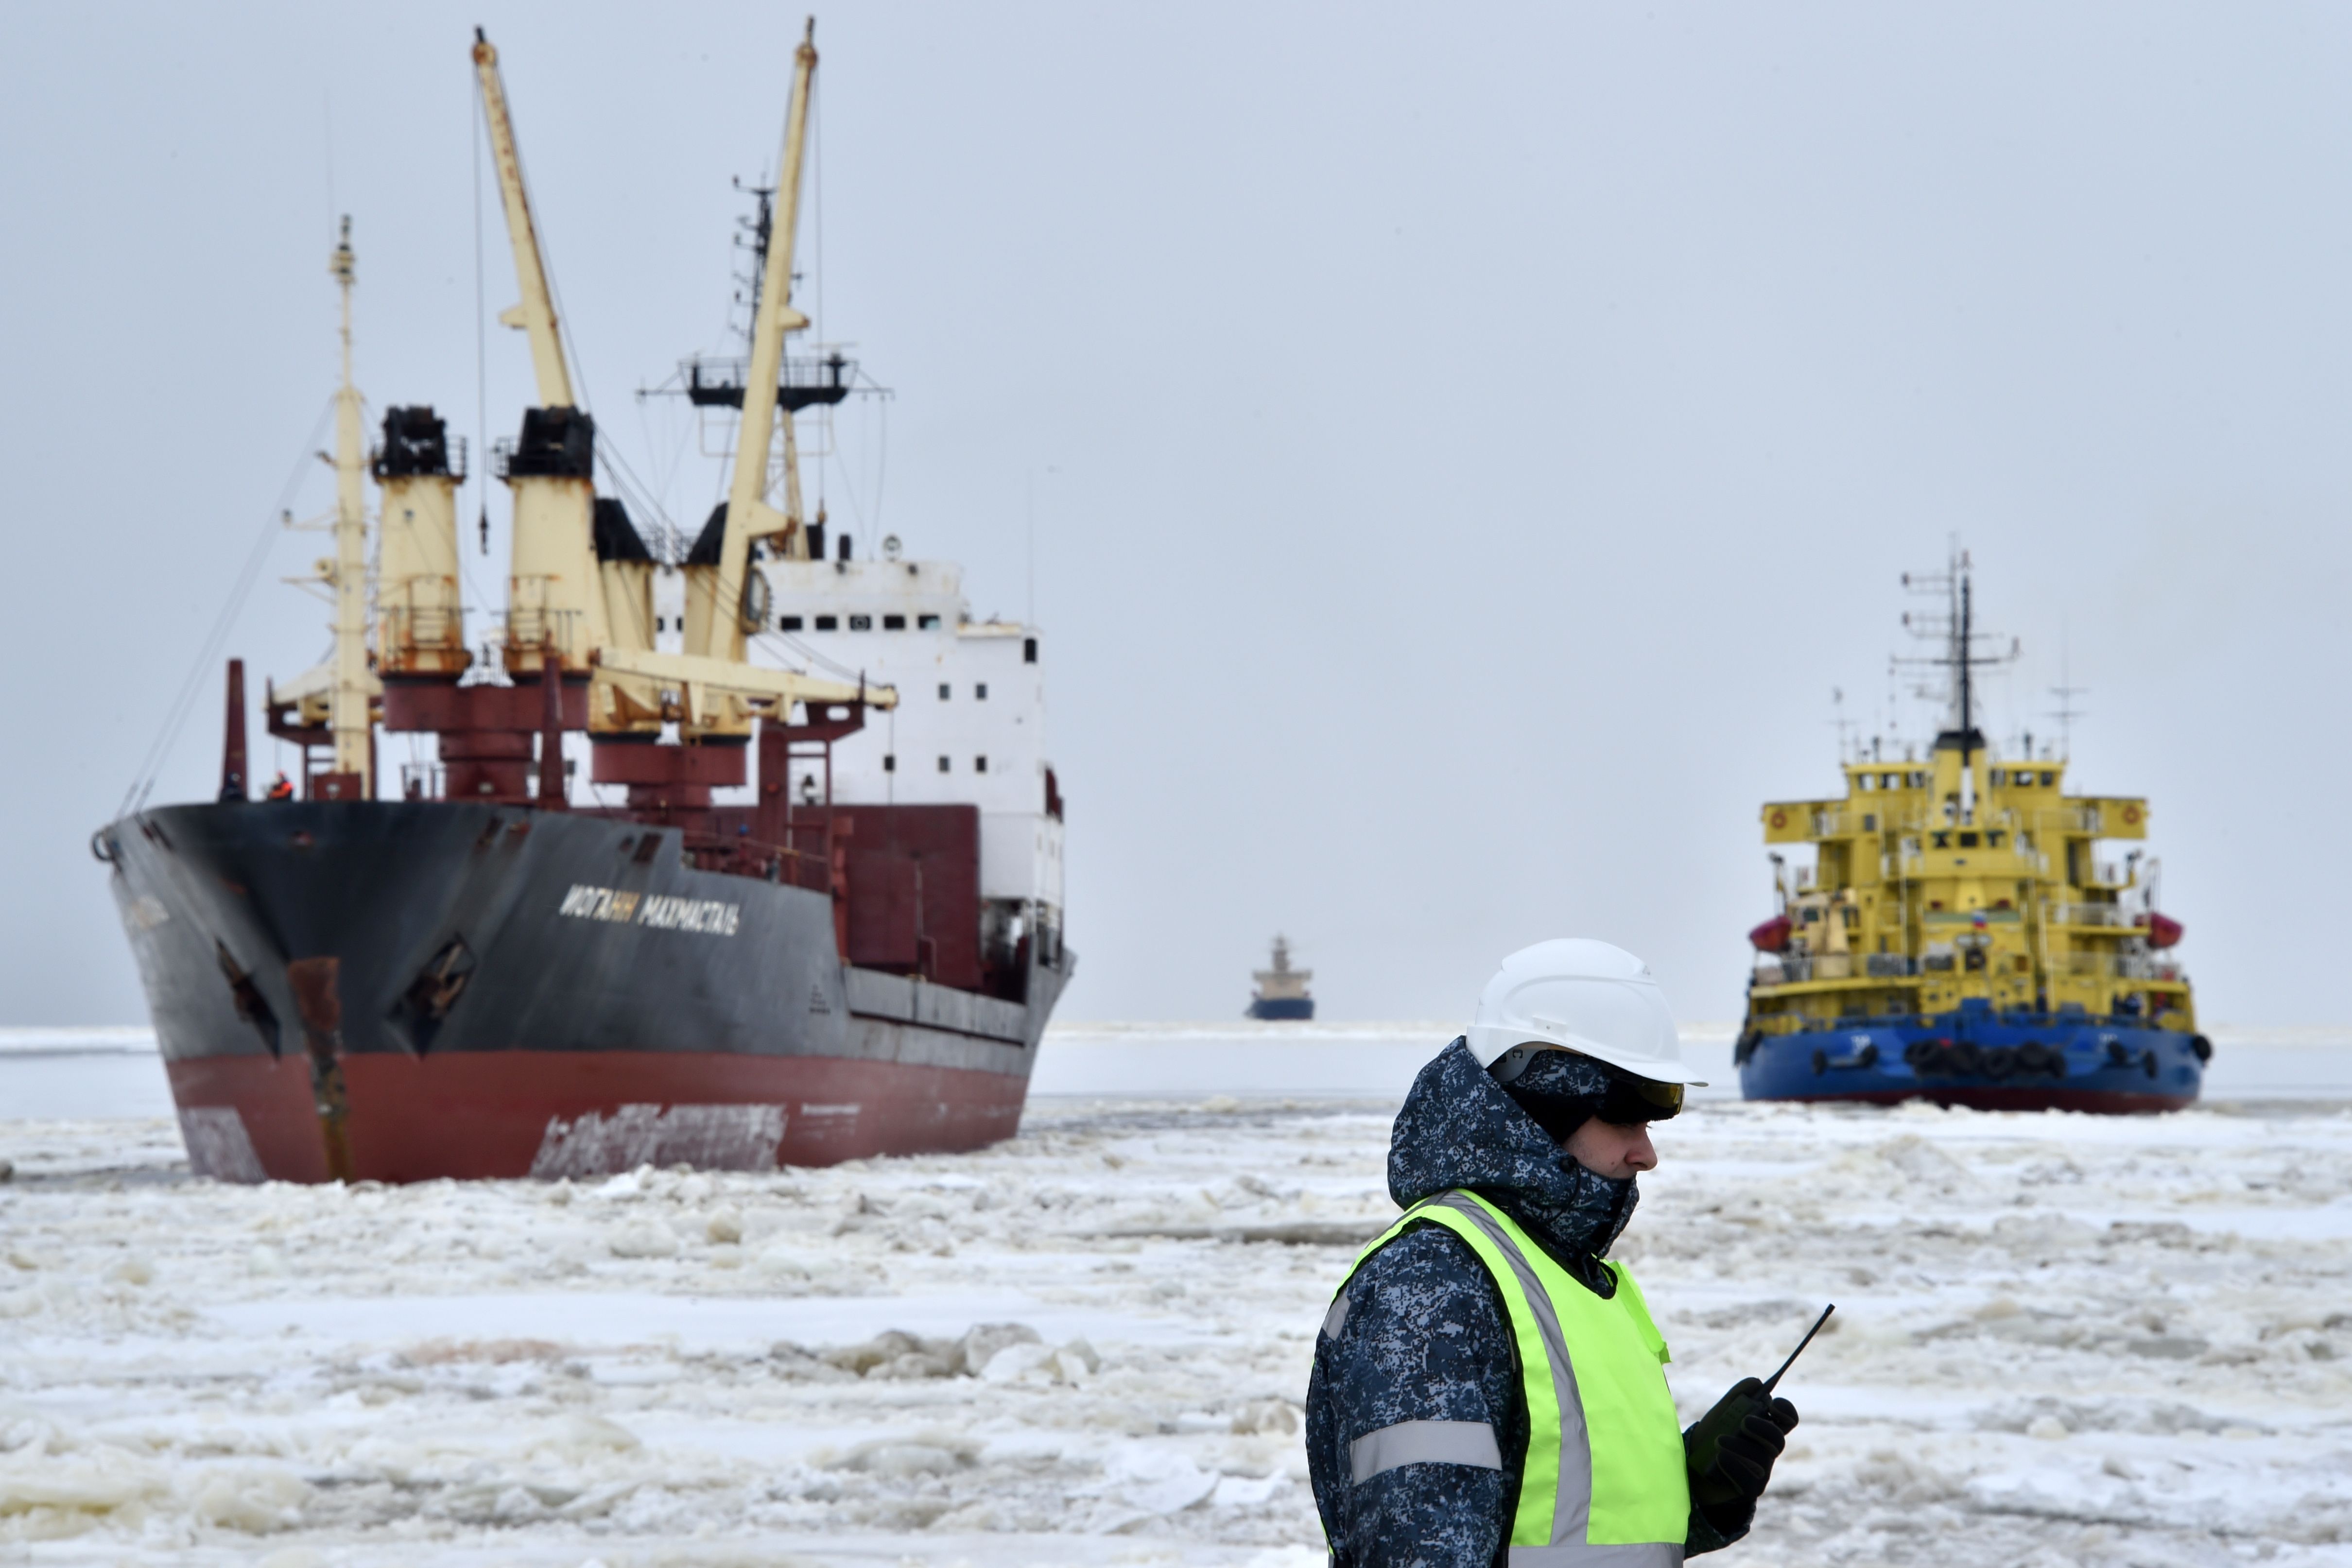 A picture taken on May 5, 2016 shows the icebreaker Tor (R) at the port of Sabetta in the Kara Sea shore line on the Yamal Peninsula in the Arctic circle, some 2450 km of Moscow. Yamal LNG -- which is set to be launched in 2017 -- is a liquefied natural gas plant with a planned capacity of 16.5 million tonnes per year and is valued at $27 billion. It is located in on the Yamal peninsula, an Arctic region of Siberia that is a key Russian oil and gas producing region. / AFP / KIRILL KUDRYAVTSEV (Photo credit should read KIRILL KUDRYAVTSEV/AFP via Getty Images)